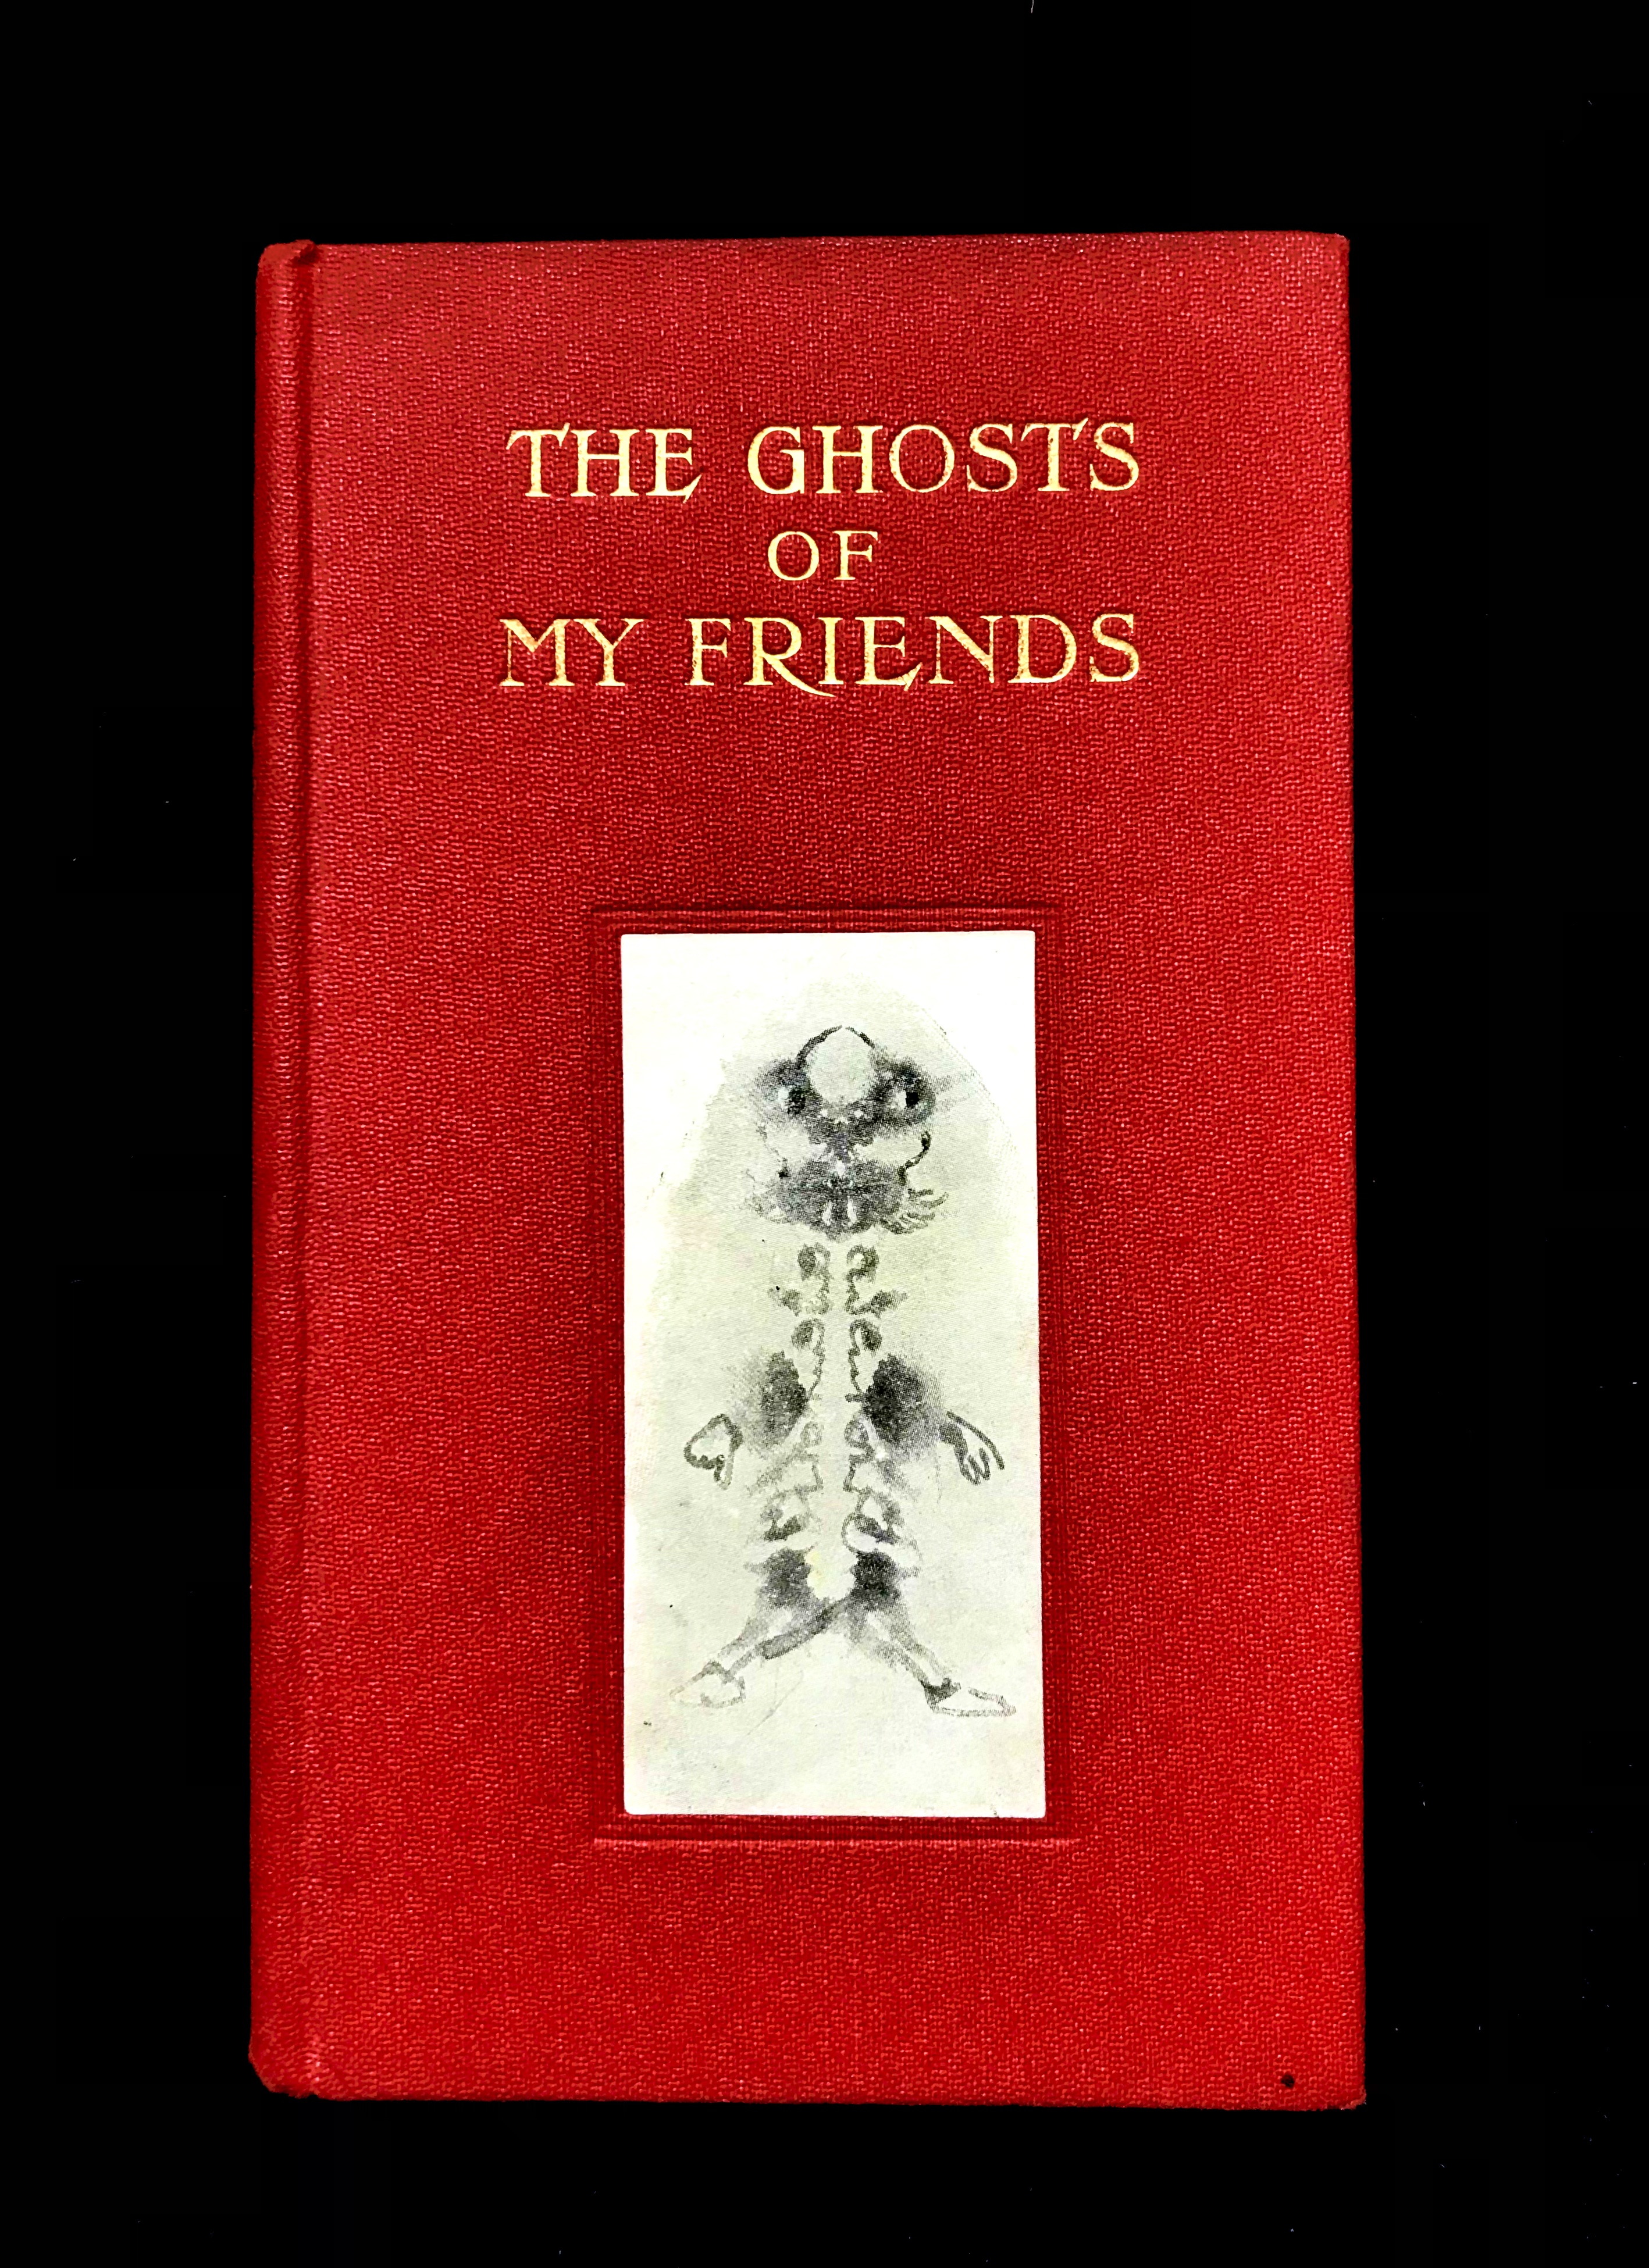 The Ghost's Of My Friends